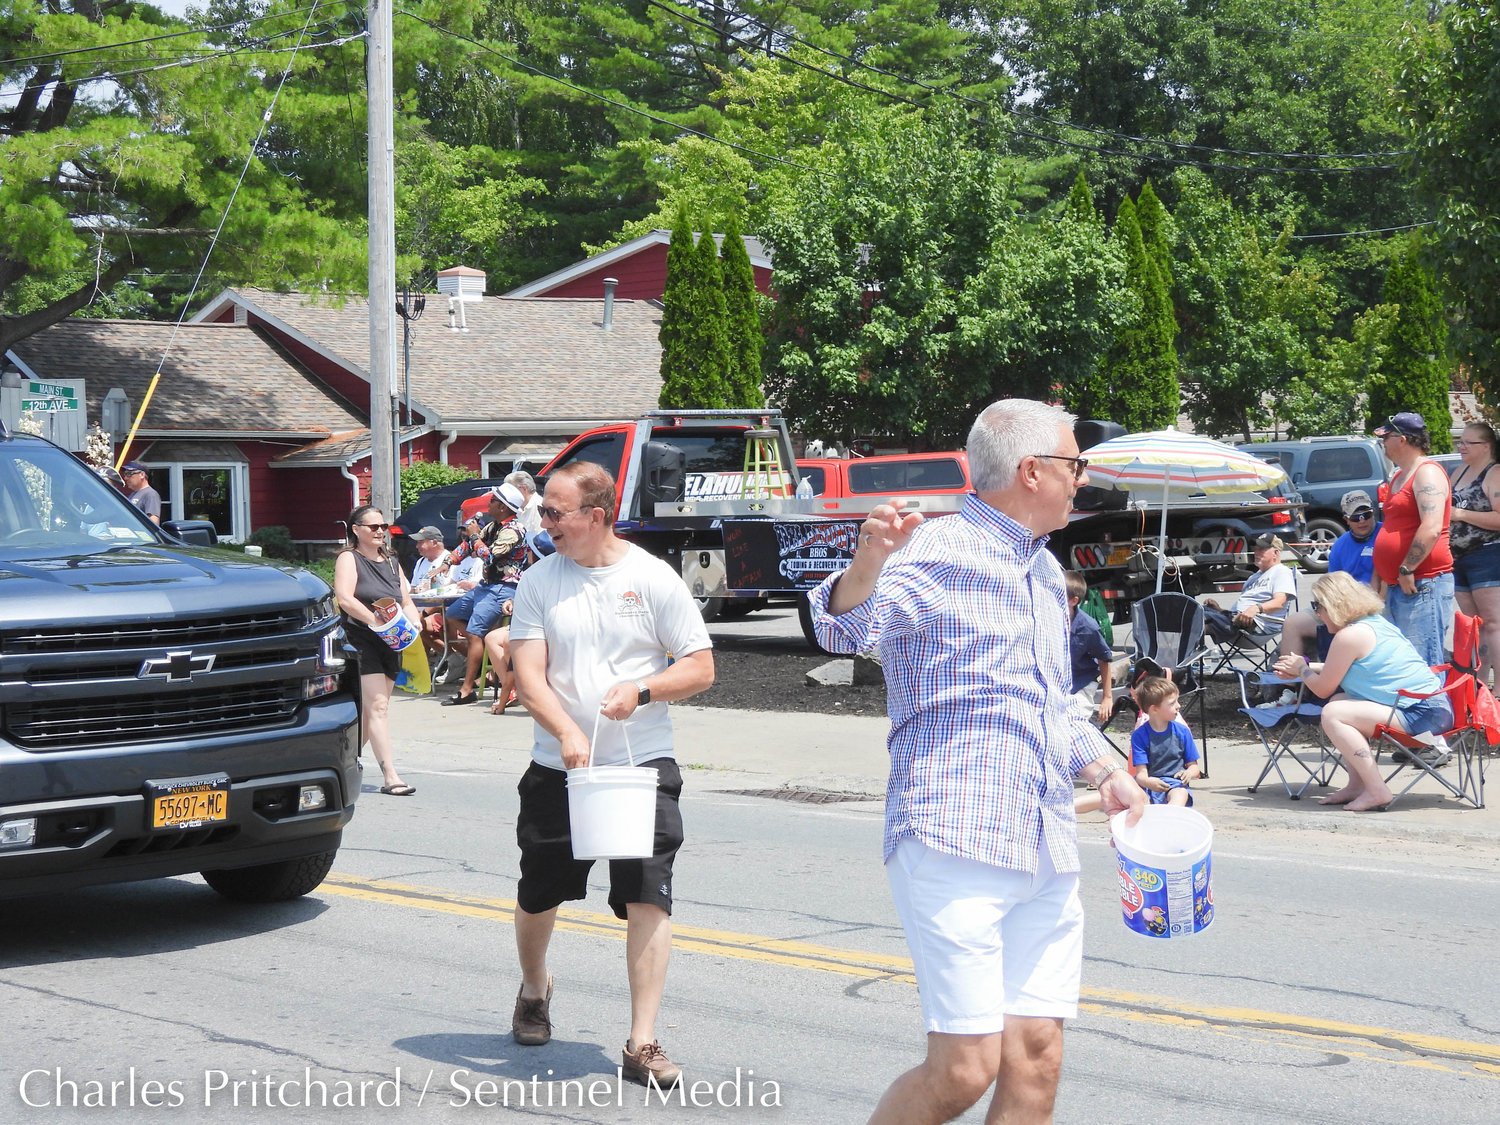 The Sylvan Beach Pirate's Parade makes its way down Main Street. Pictured is Senator Joe Griffo and Oneida County Executive Anthony Picente, handing out candy to parade attendees.